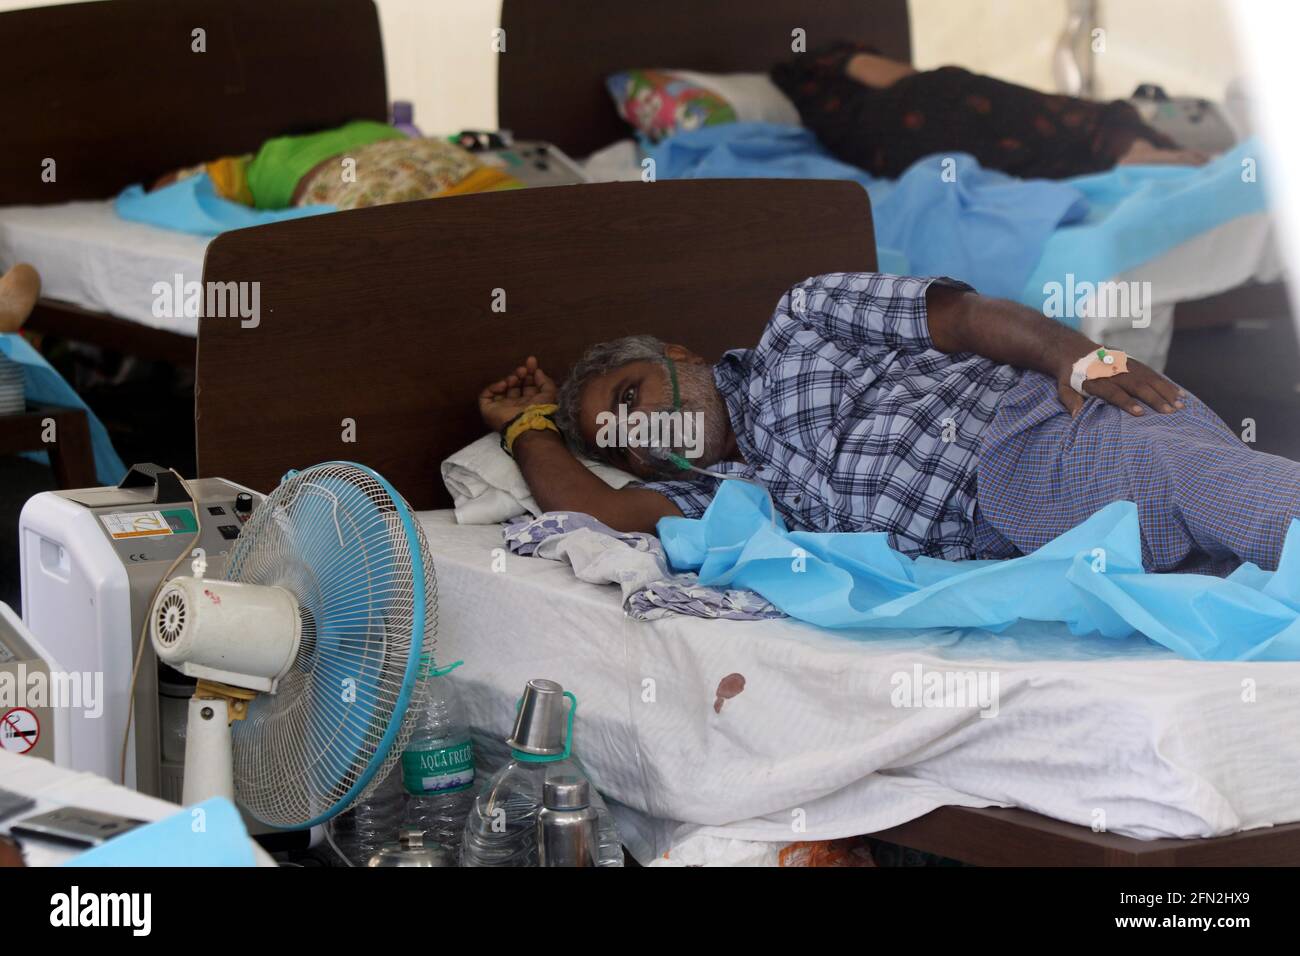 Chennai, India. 13th May, 2021. Oxygen concentrator beds are arranged for COVID-19 patients at the Omandur Multi speciality hospital in Chennai, India, on May 13, 2021. Credit: Str/Xinhua/Alamy Live News Stock Photo